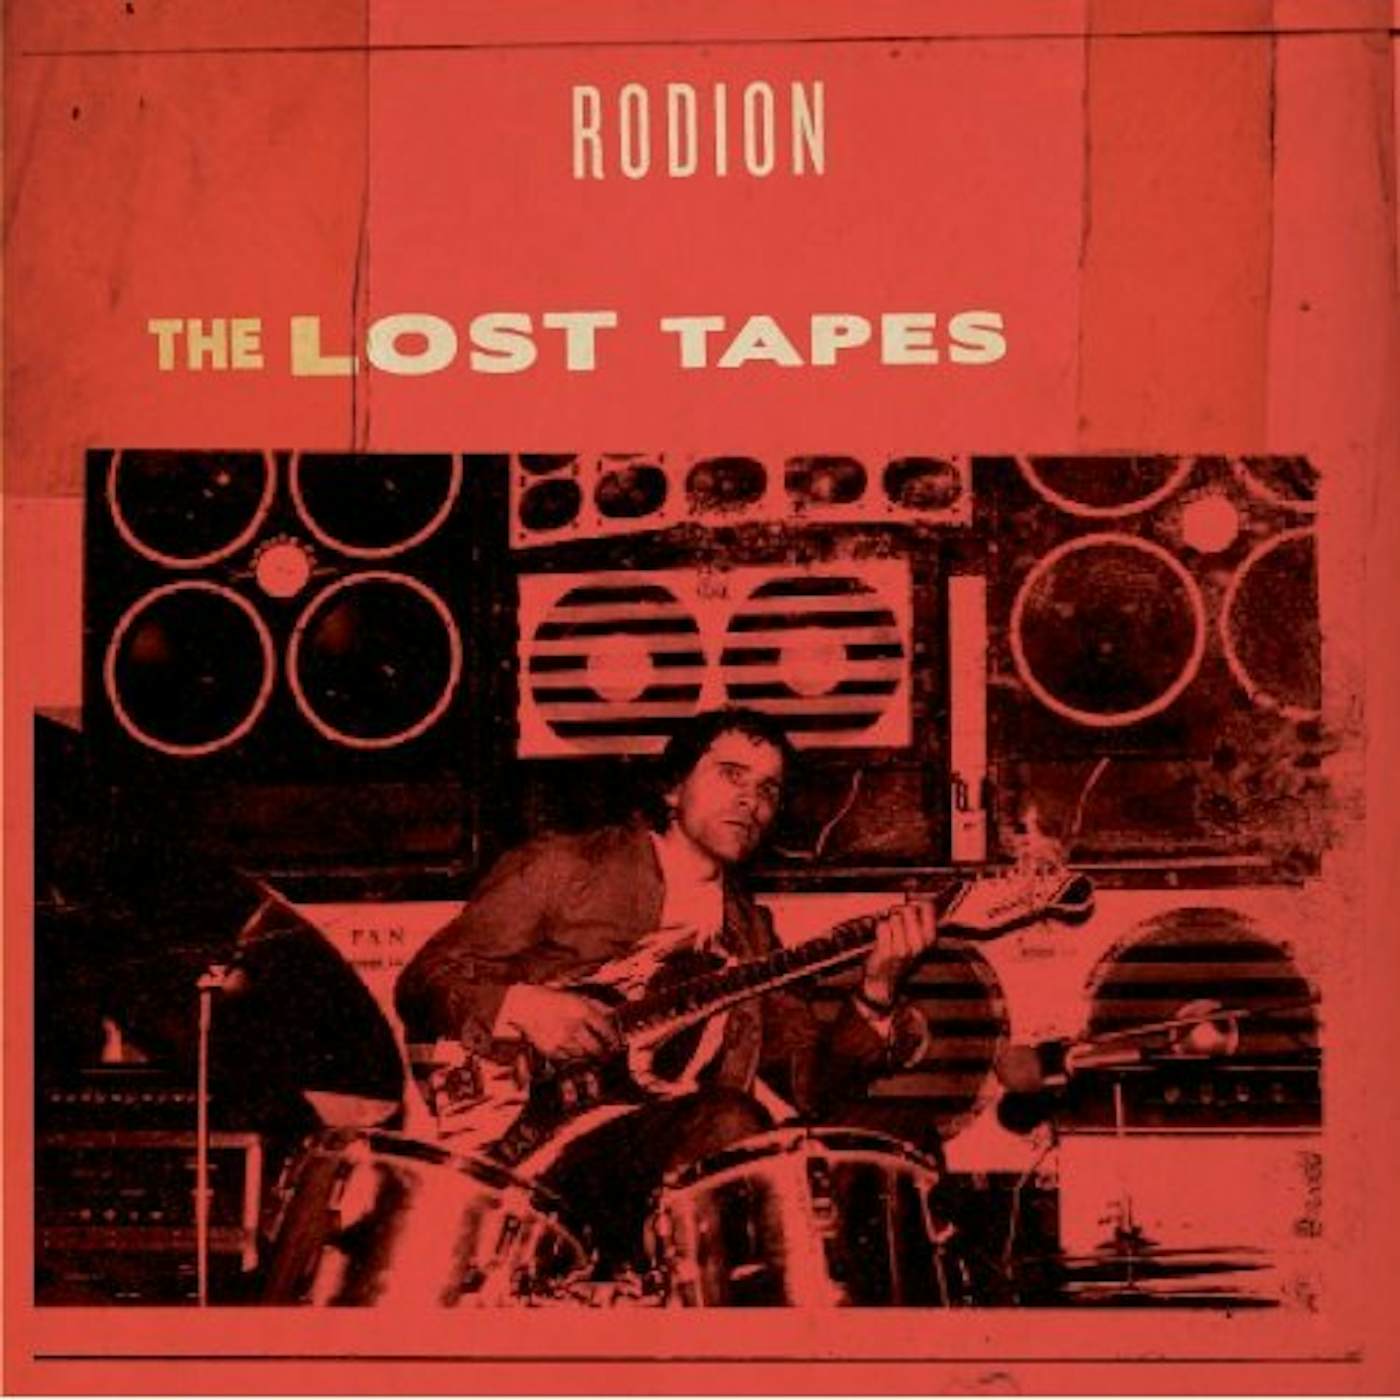 Rodion G.A. LOST TAPES (W/CD) (Vinyl)